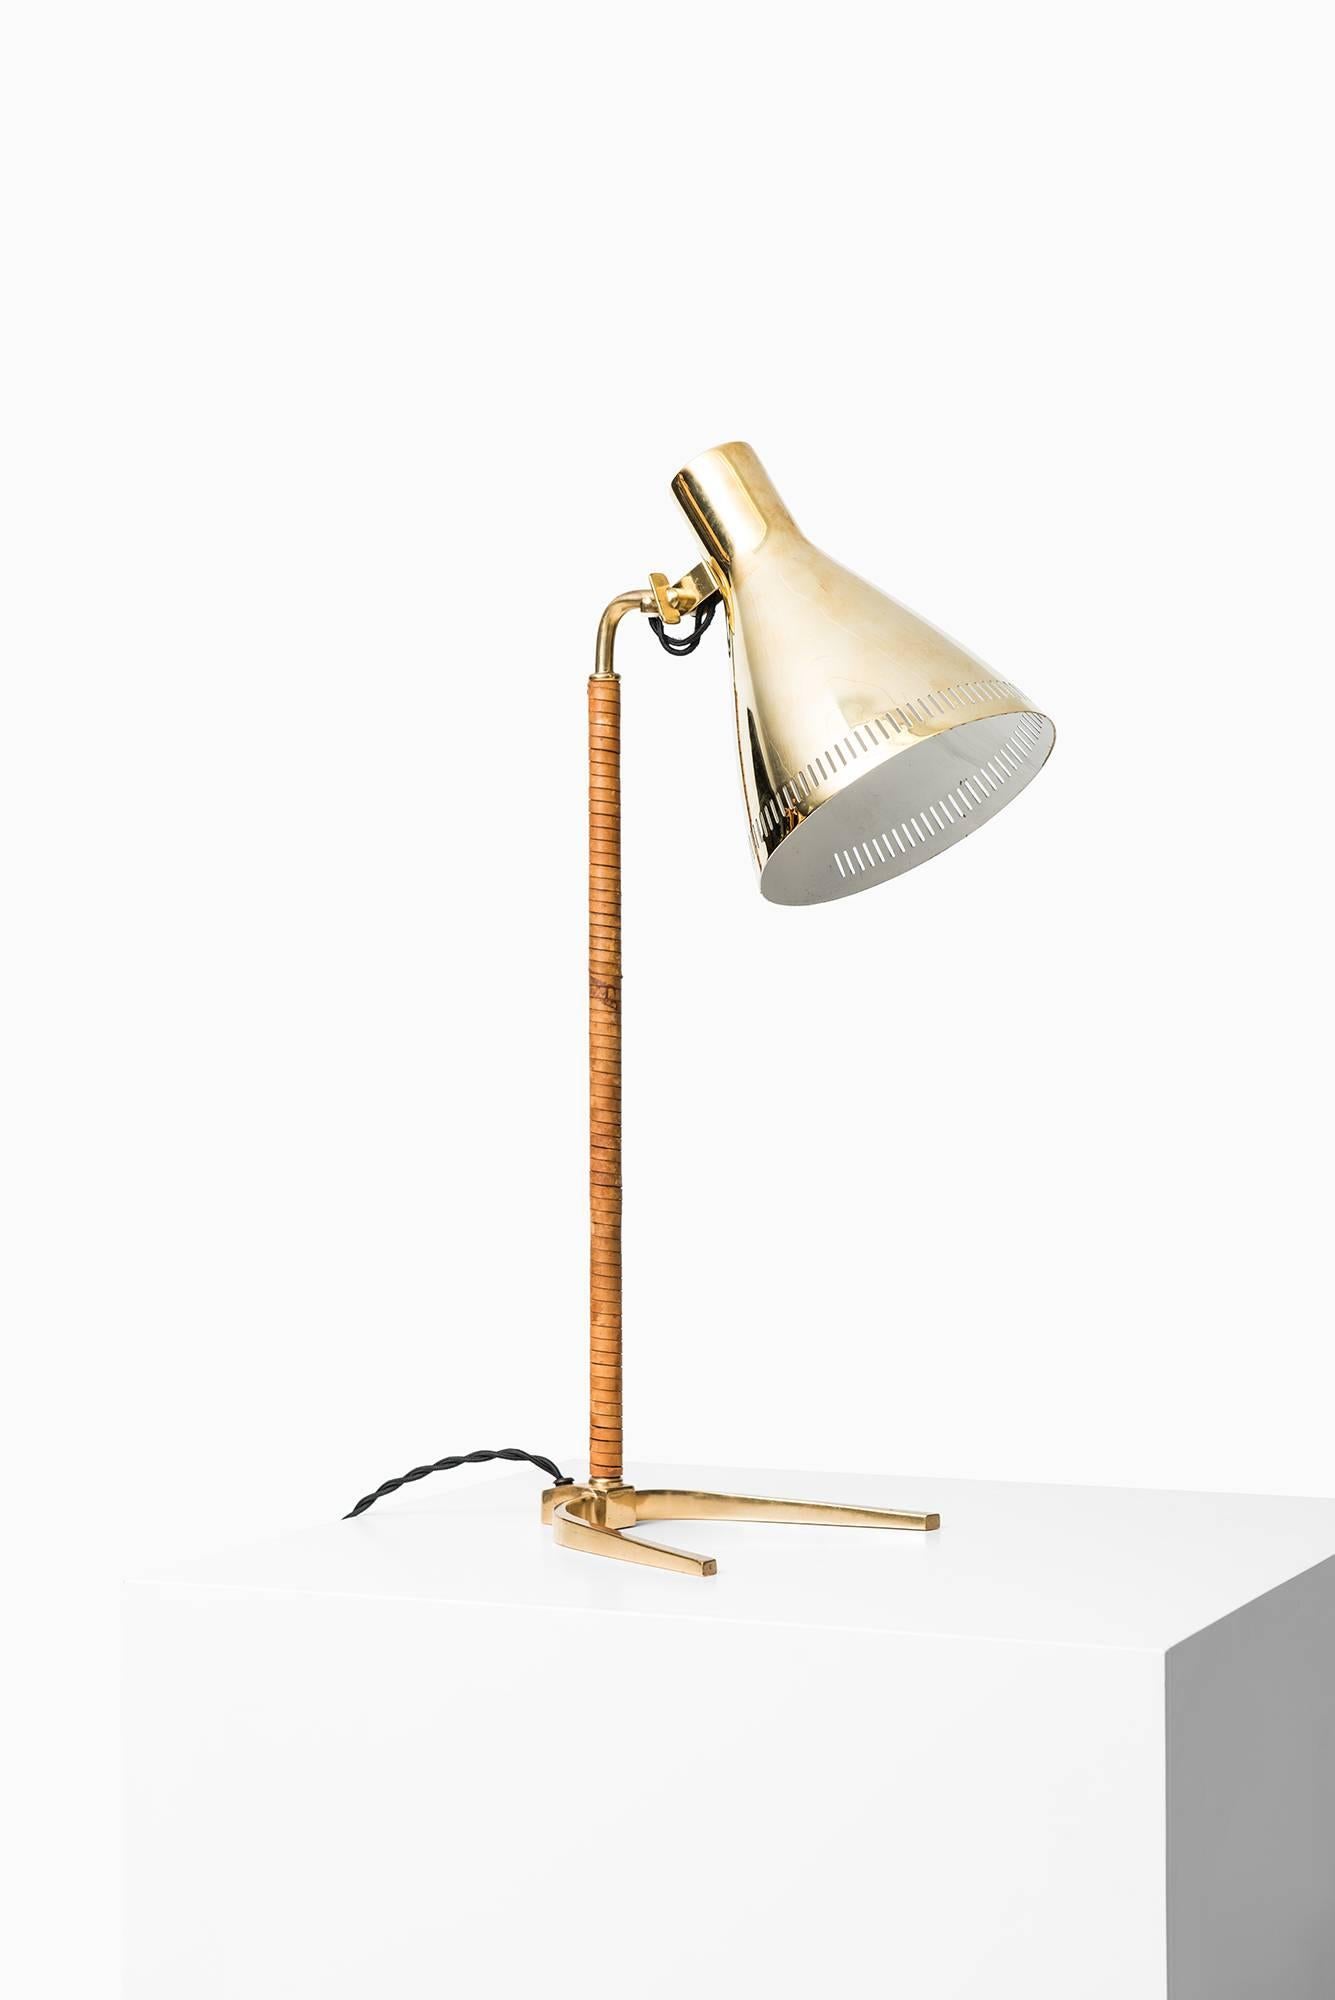 Paavo Tynell Table Lamp Model 9224 by Taito Oy in Finland 1